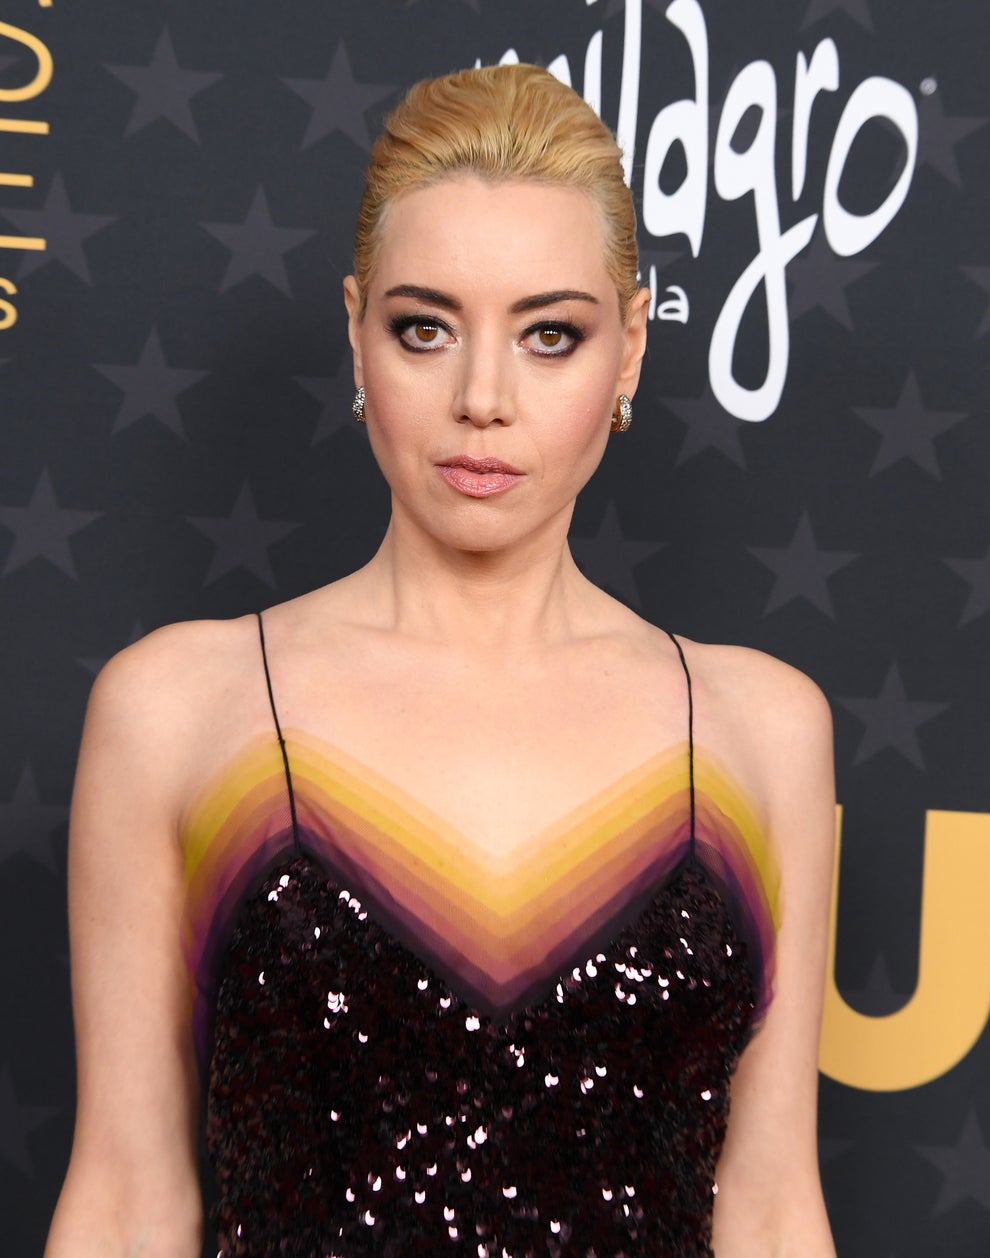 Fans speculate why Aubrey Plaza looked visibly annoyed at the SAG awards:  'She almost got elbowed